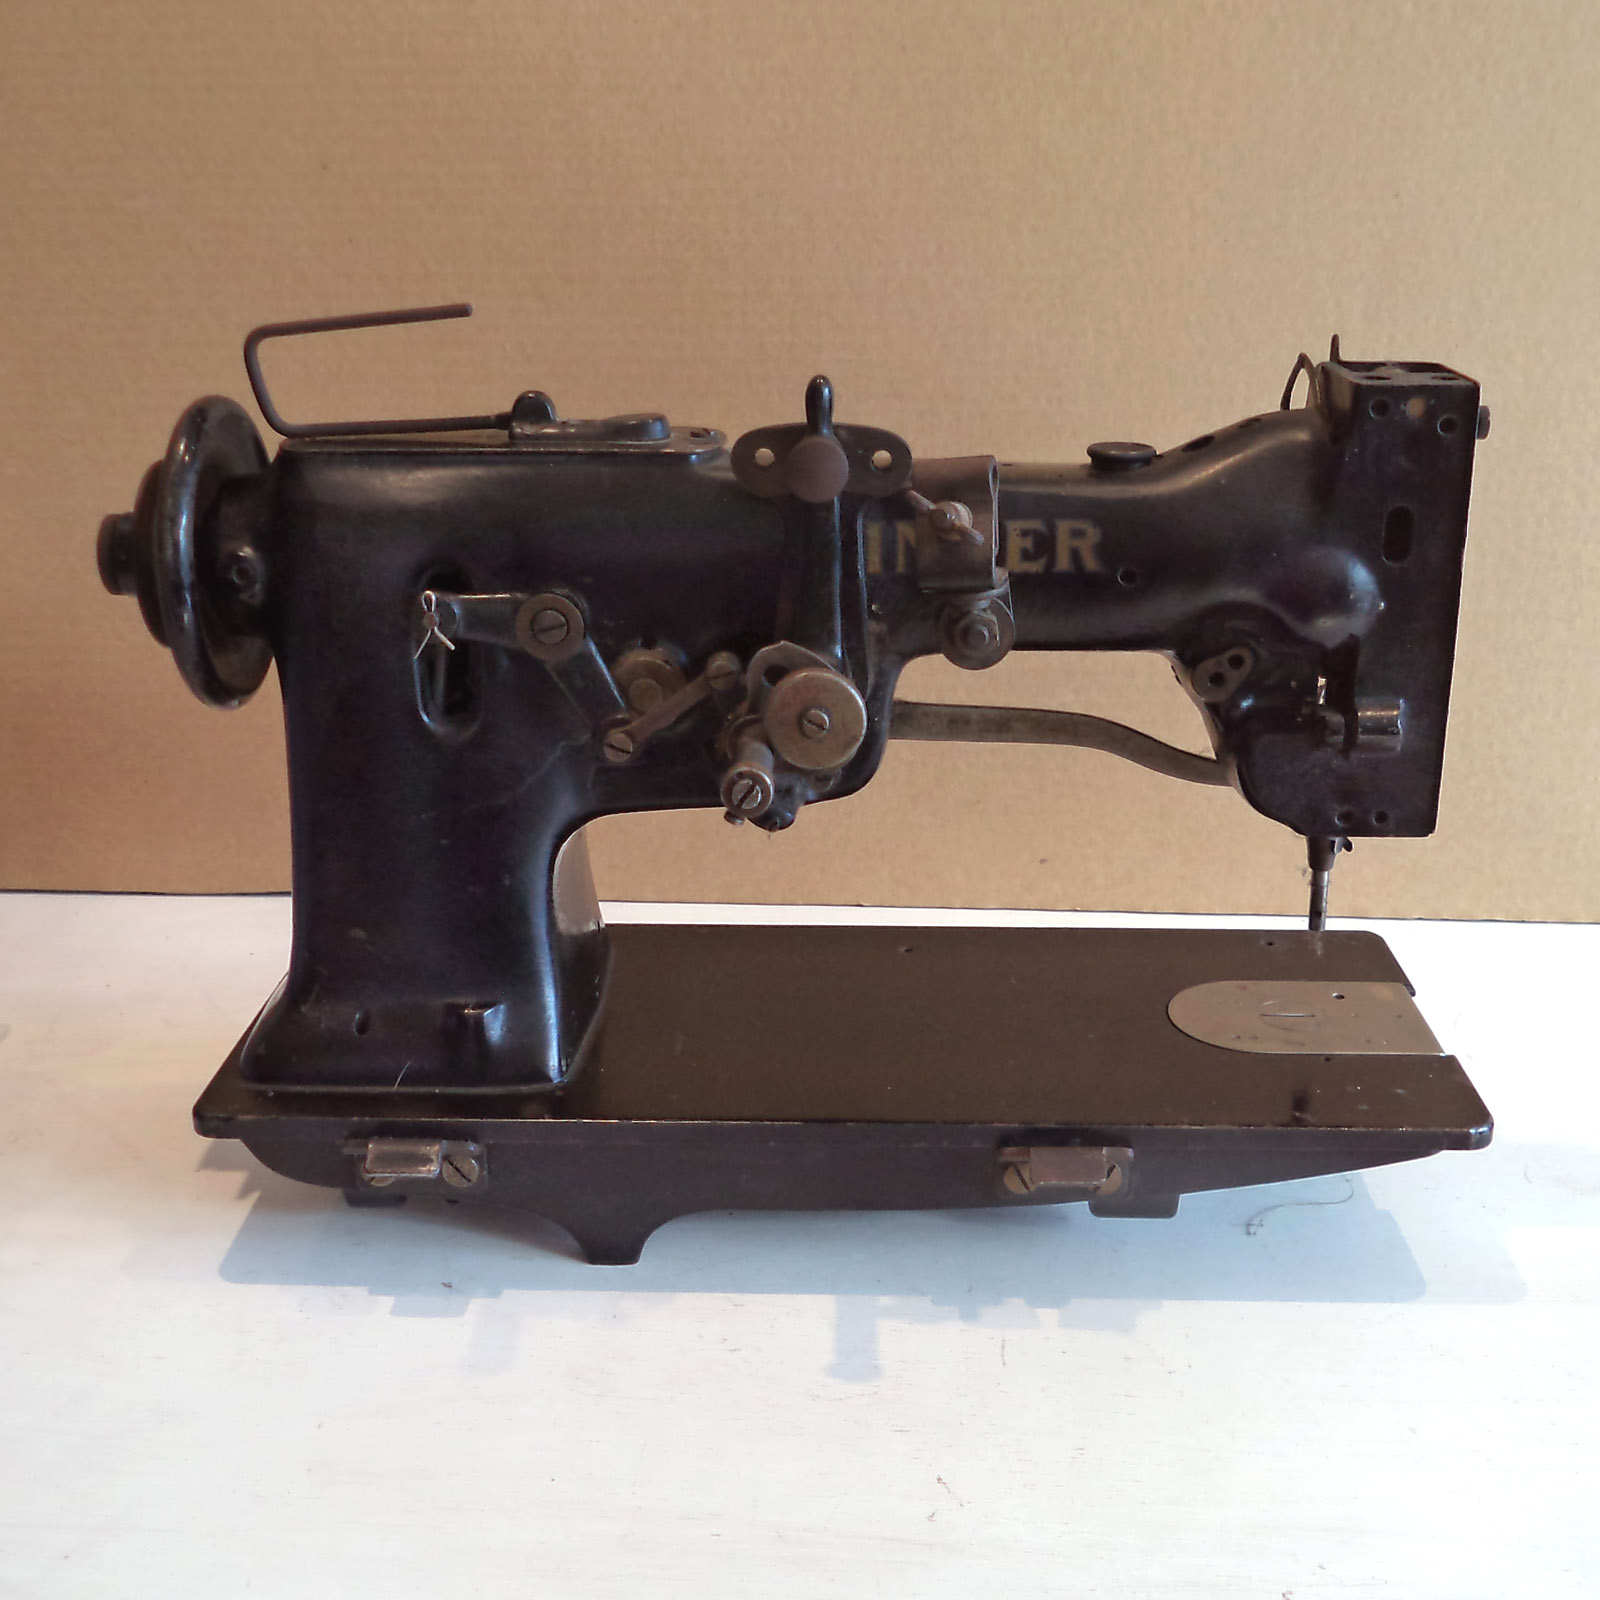 Singer 107w102 Industrial Embroidery Sewing Machine